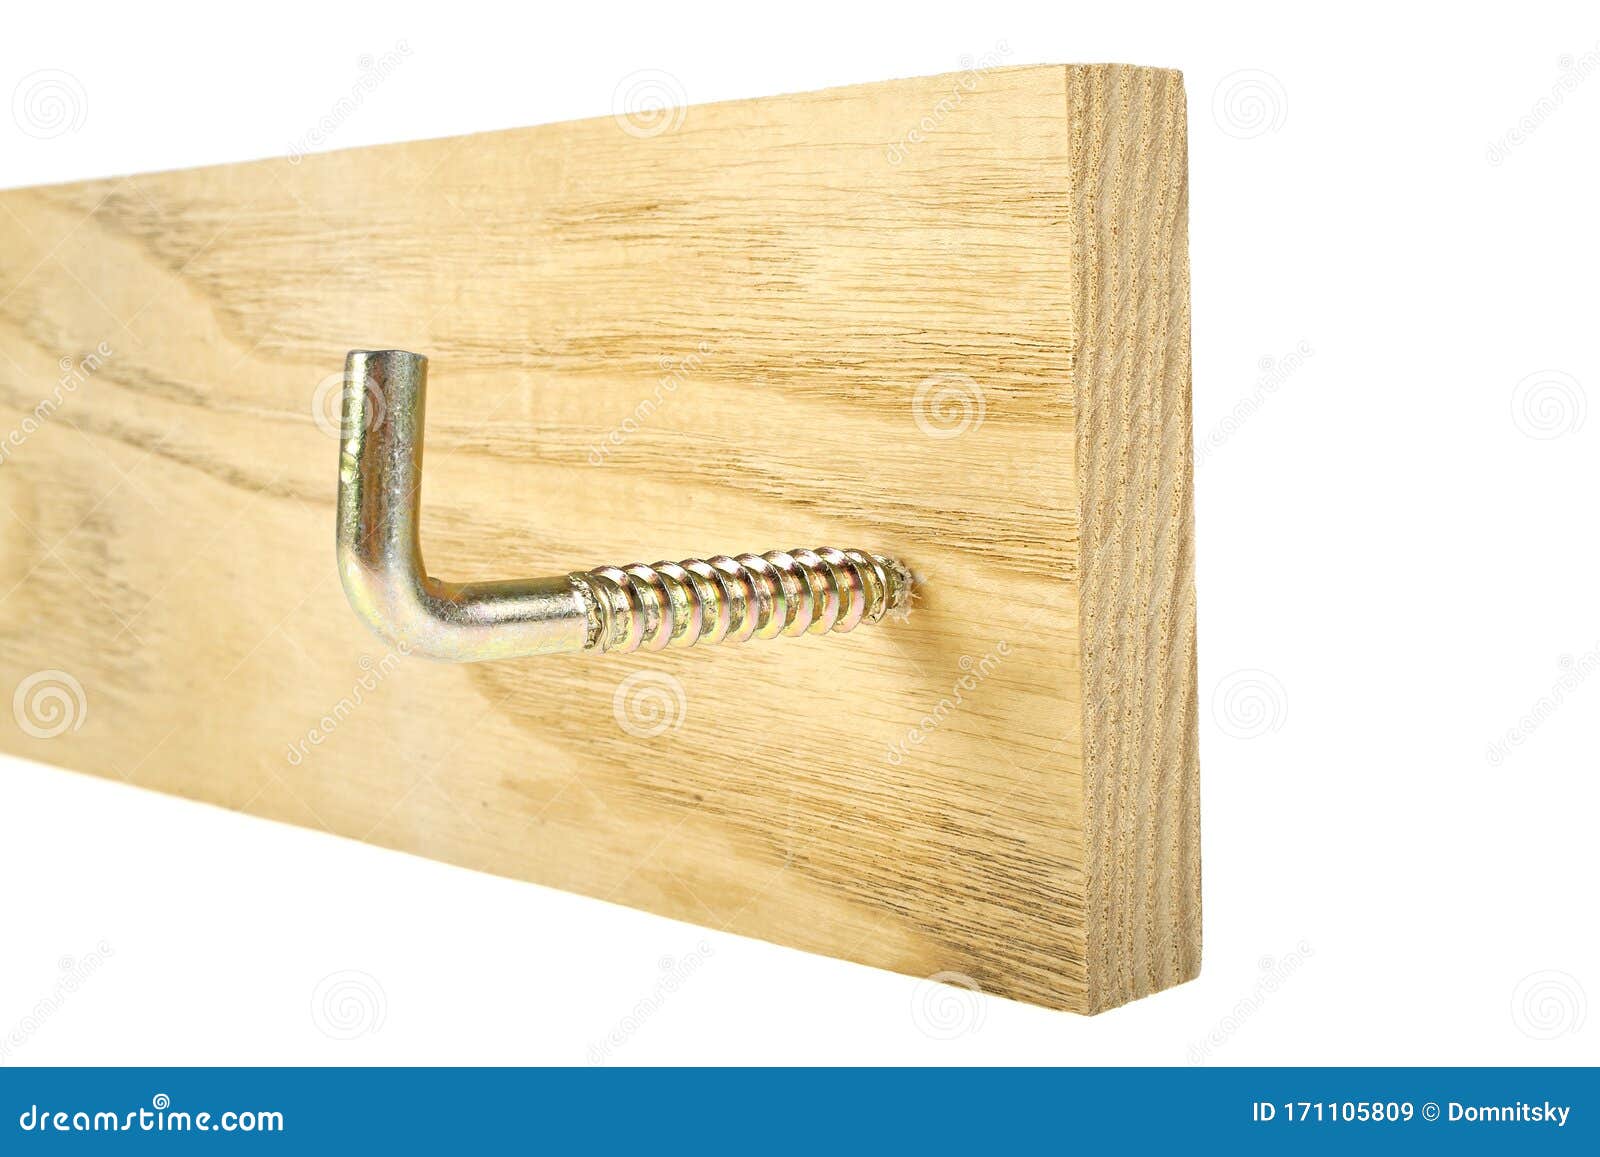 Hook Screwed into the Wooden Plank, White Background Stock Image